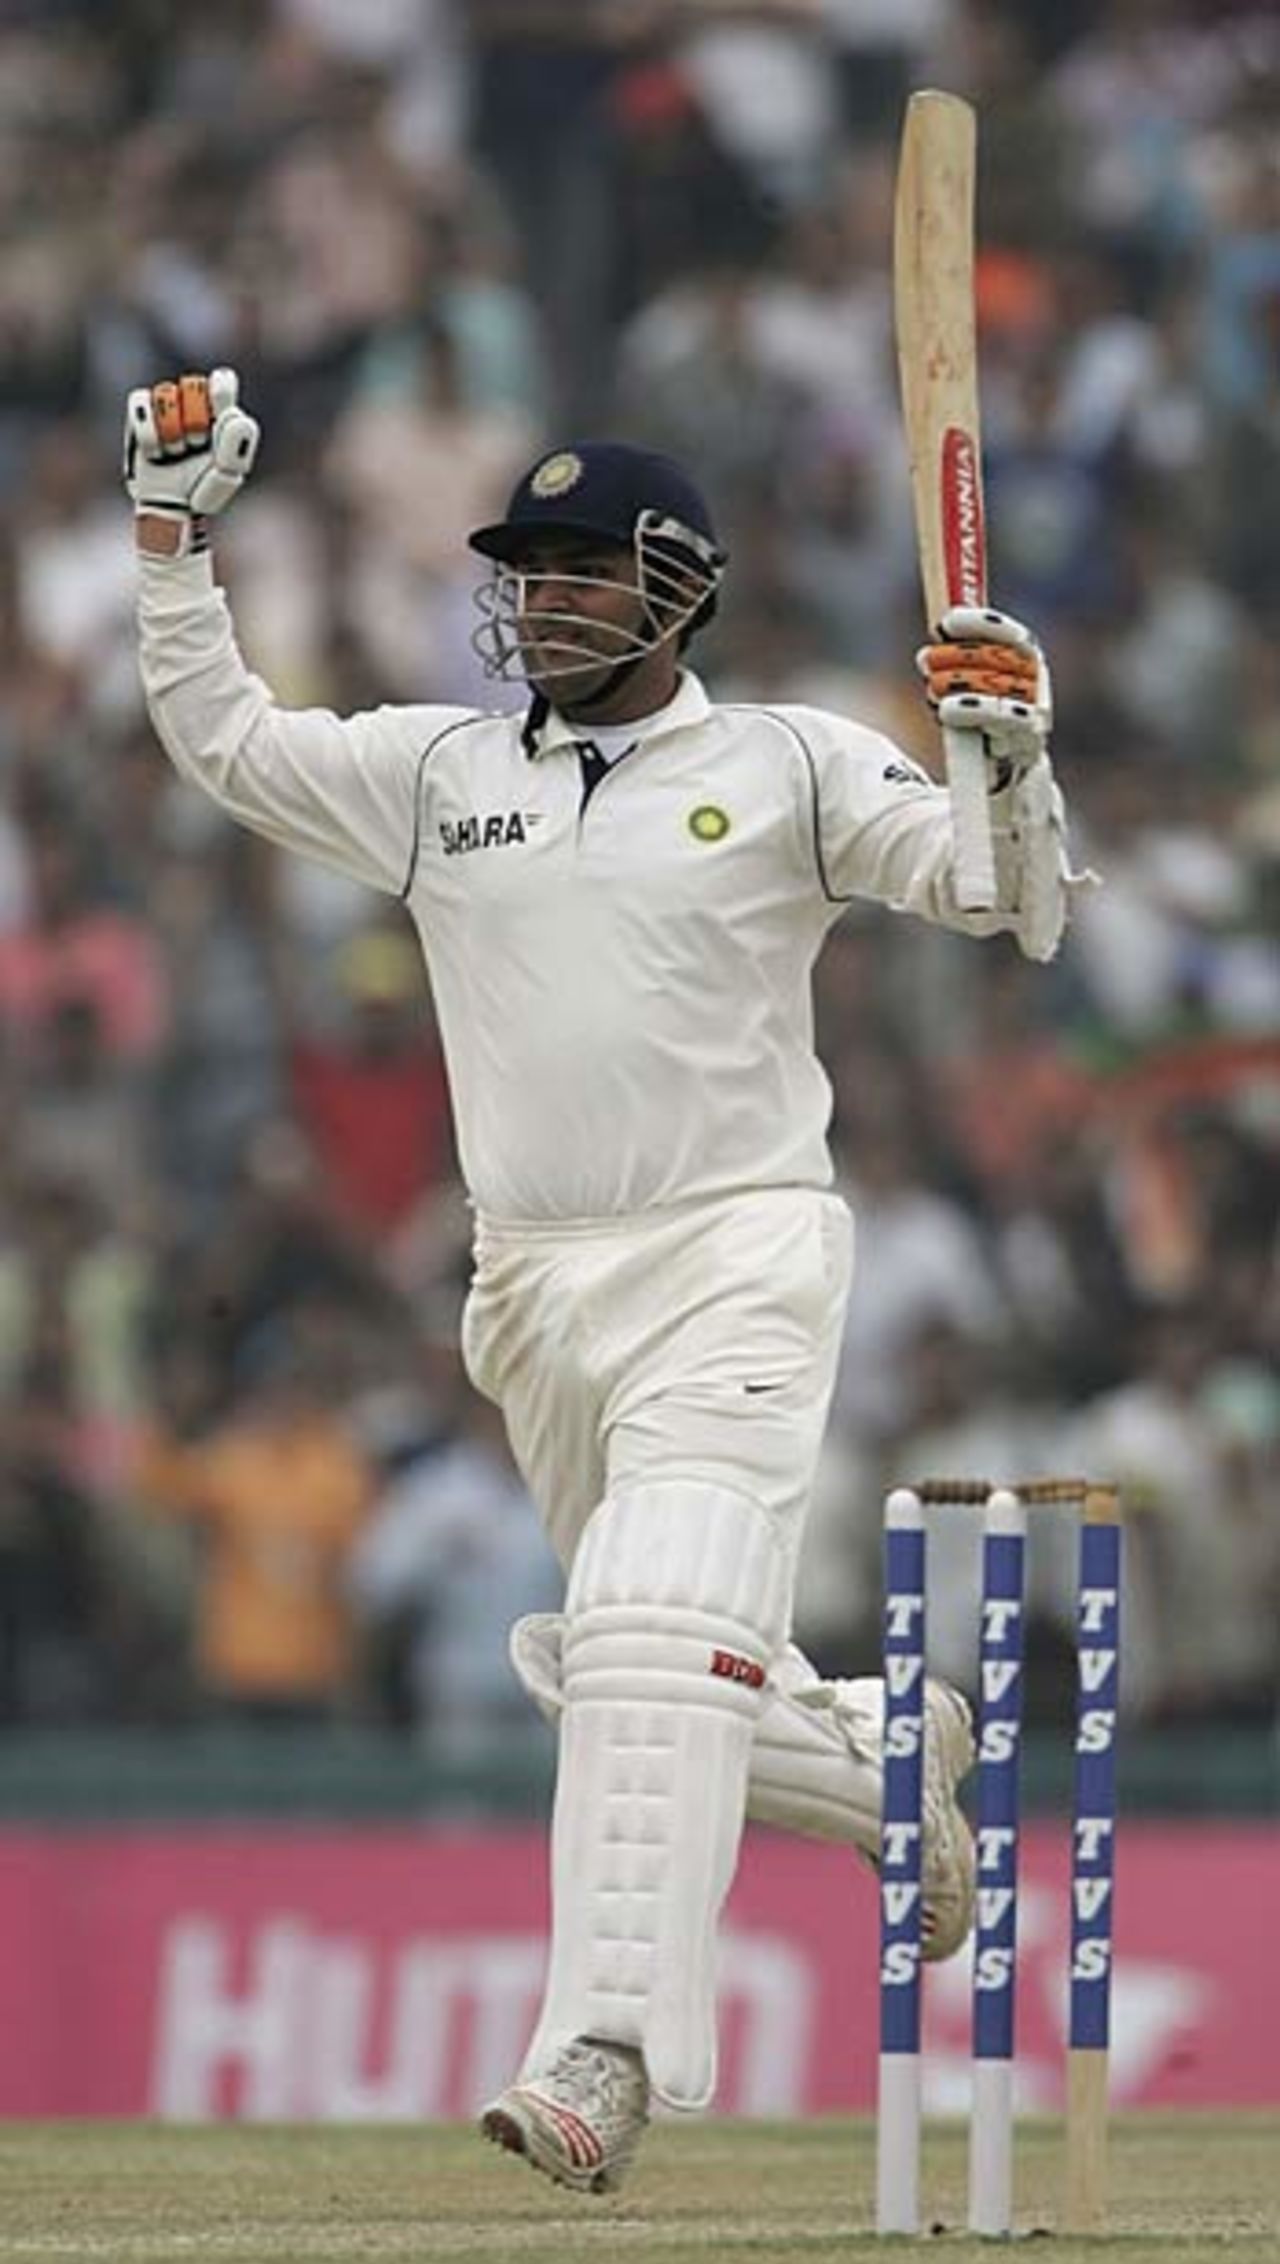 Virender Sehwag celebrates hitting the winning run, India v England, 2nd Test, Mohali, March 13, 2006